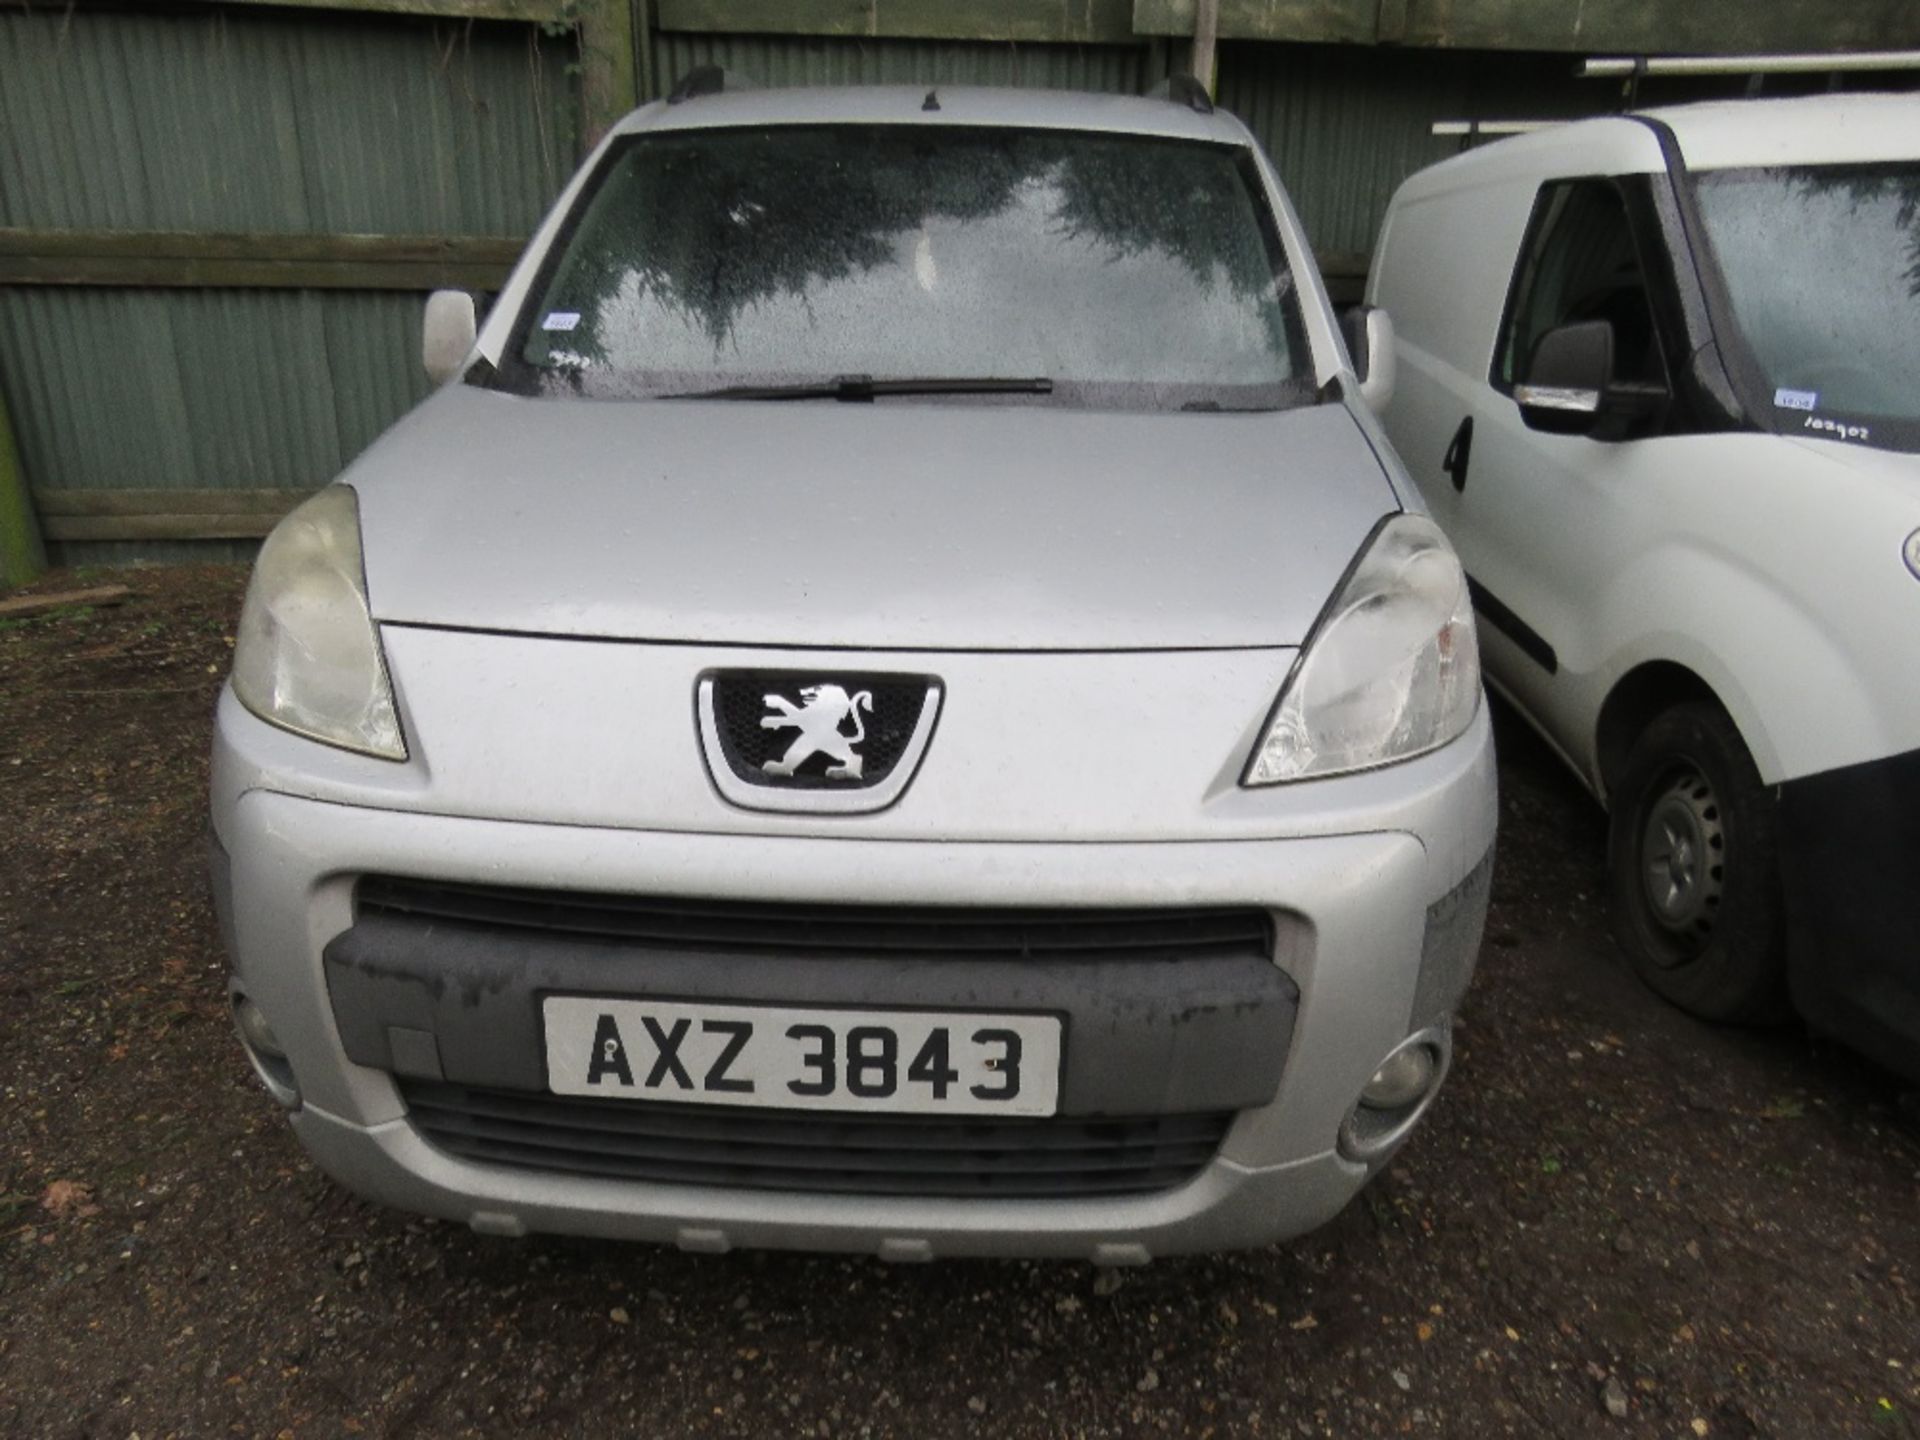 PEUGEOT PARTNER CAR REG:AXZ 3843. WITH V5 FIRST REGISTERED 23/10/2010. MOT EXPIRED. MANUAL GEARBOX. - Image 2 of 8